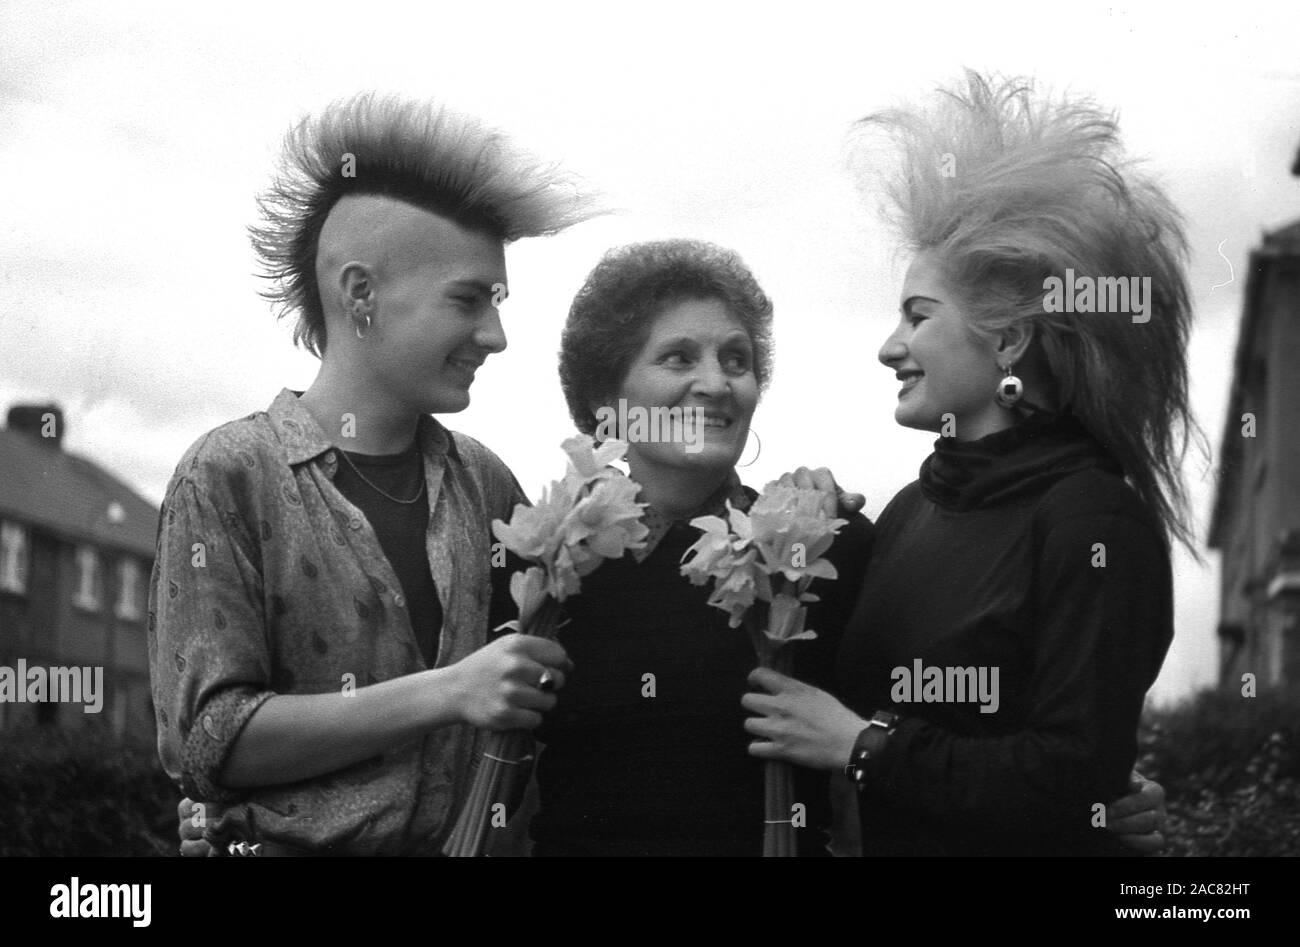 1987, 'mother's day'...two young adults in the 'punk' hair fashions of the era, standing outside in a street present their mother with flowers on this special day, England, UK. Stock Photo